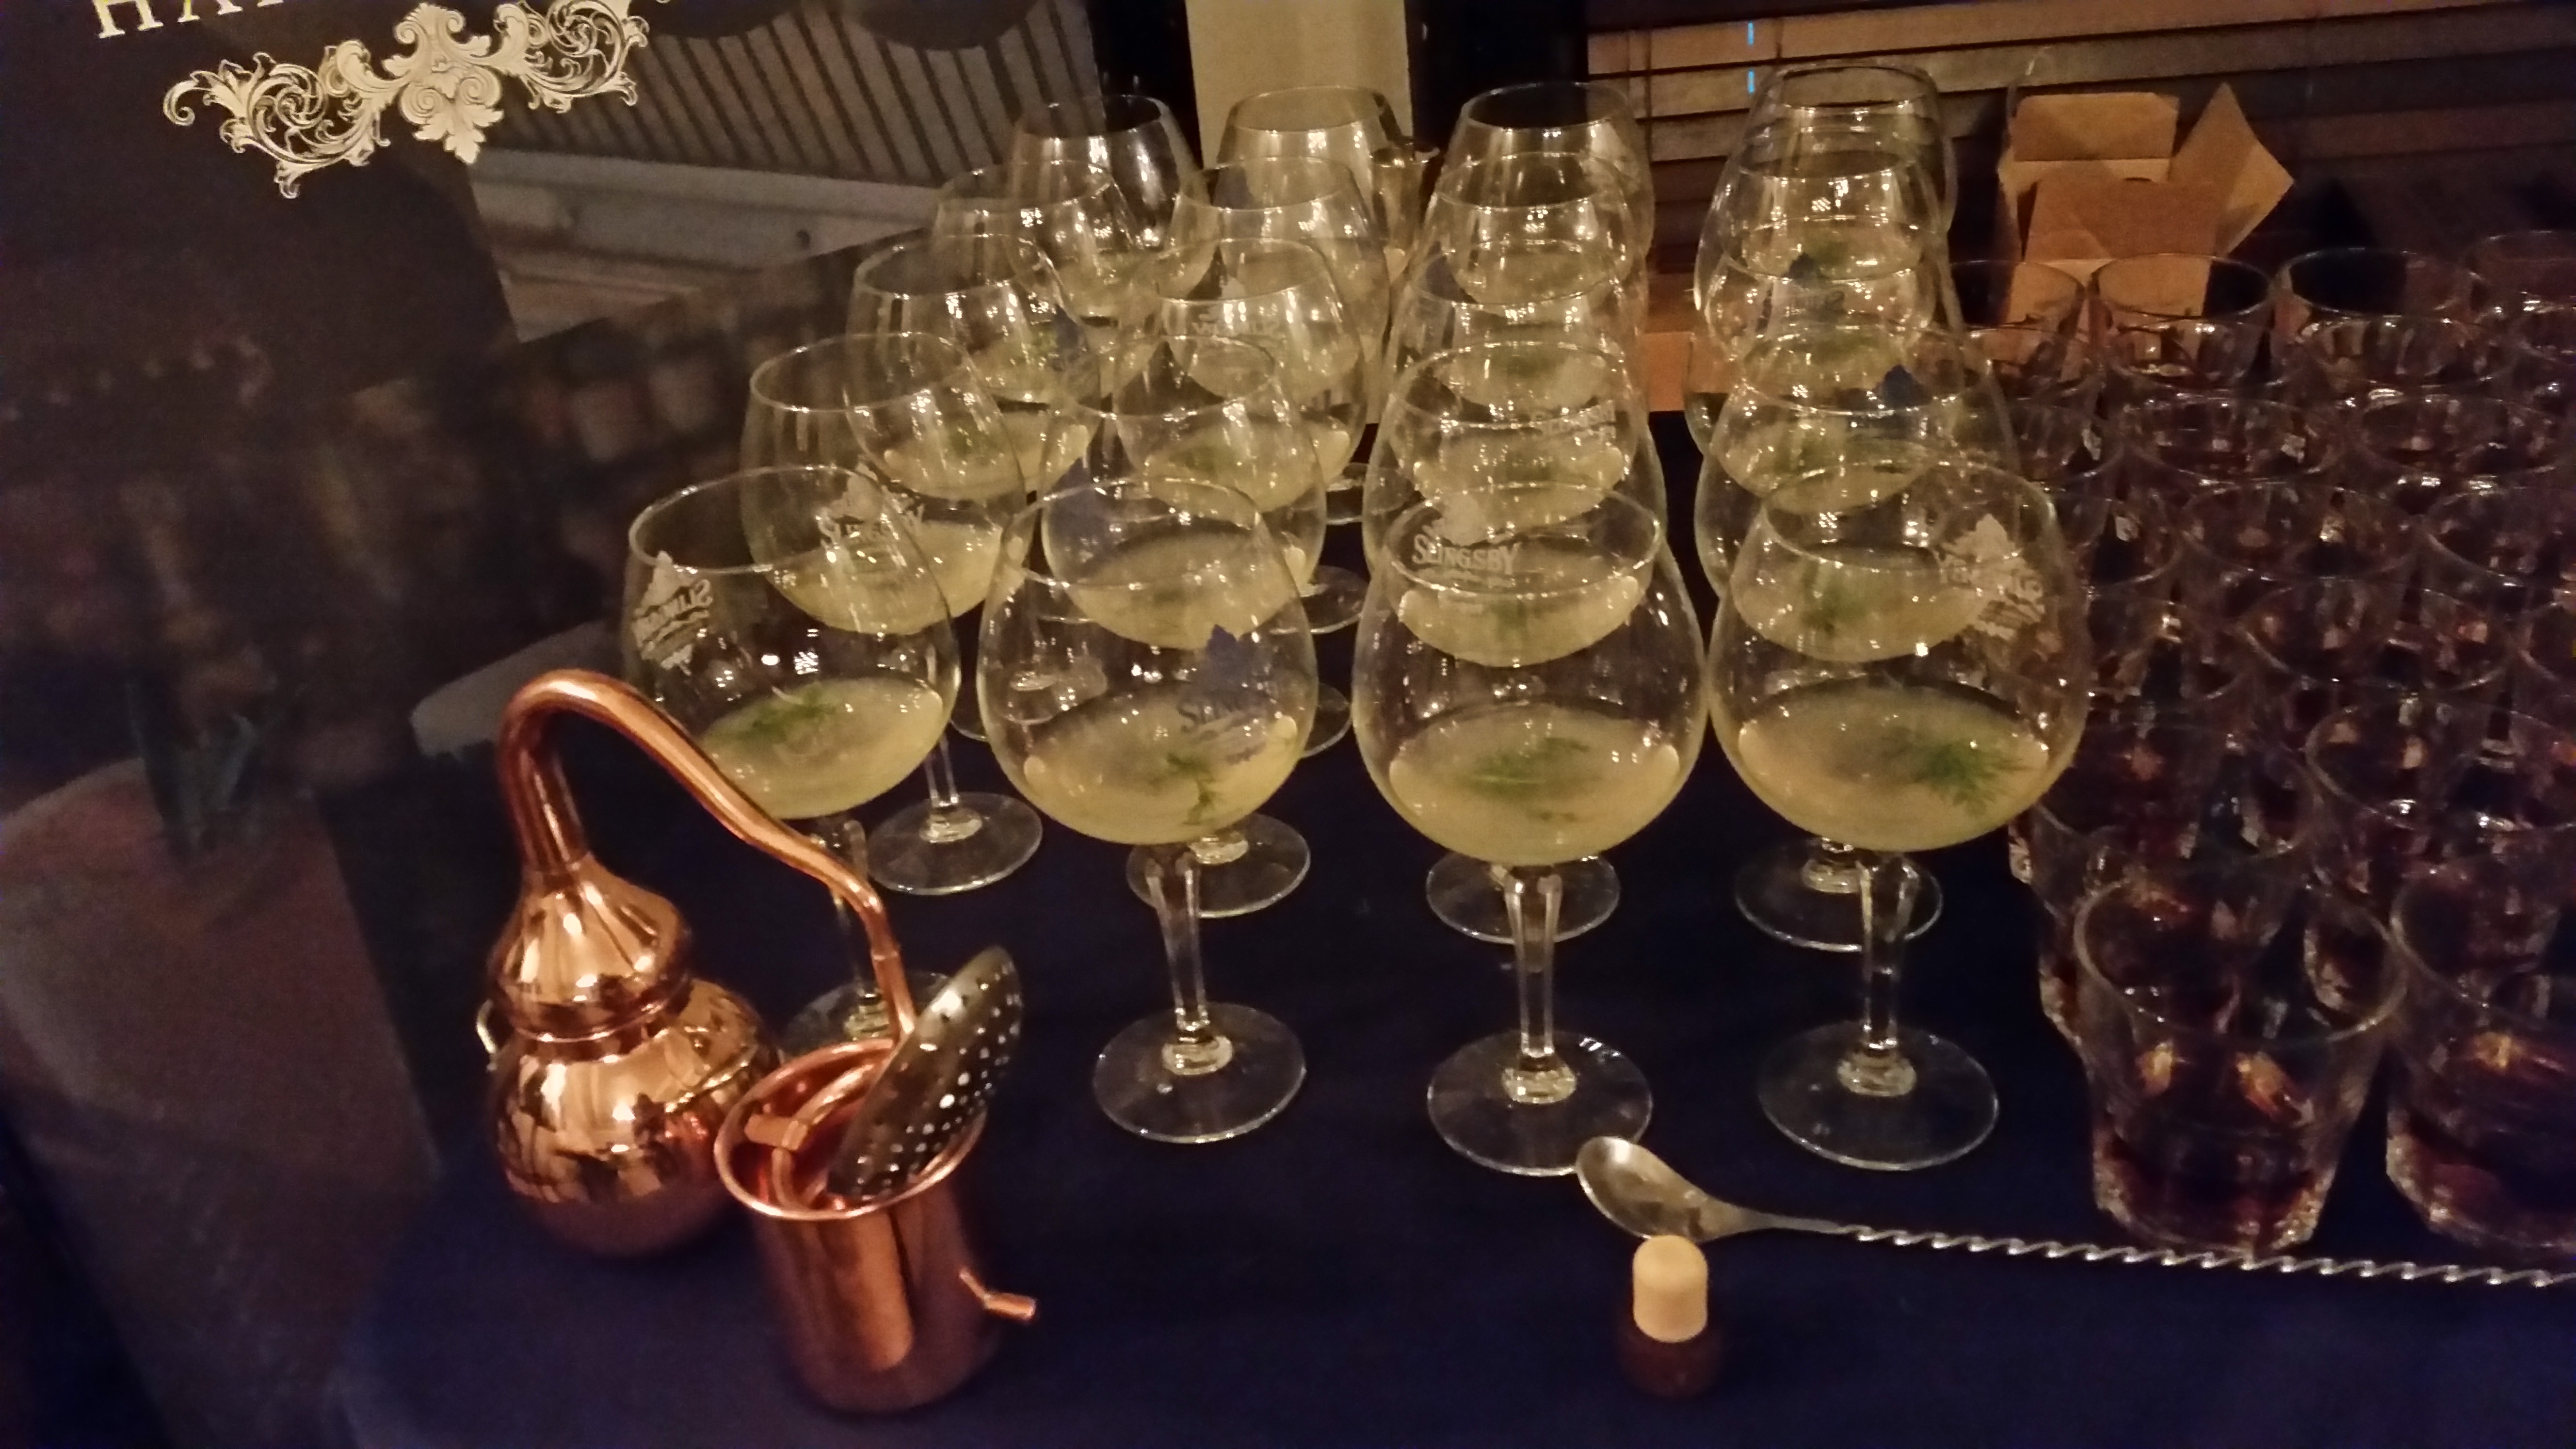 I never say no to gin: The Spirit of Harrogate & Slingsby - Lost in the North